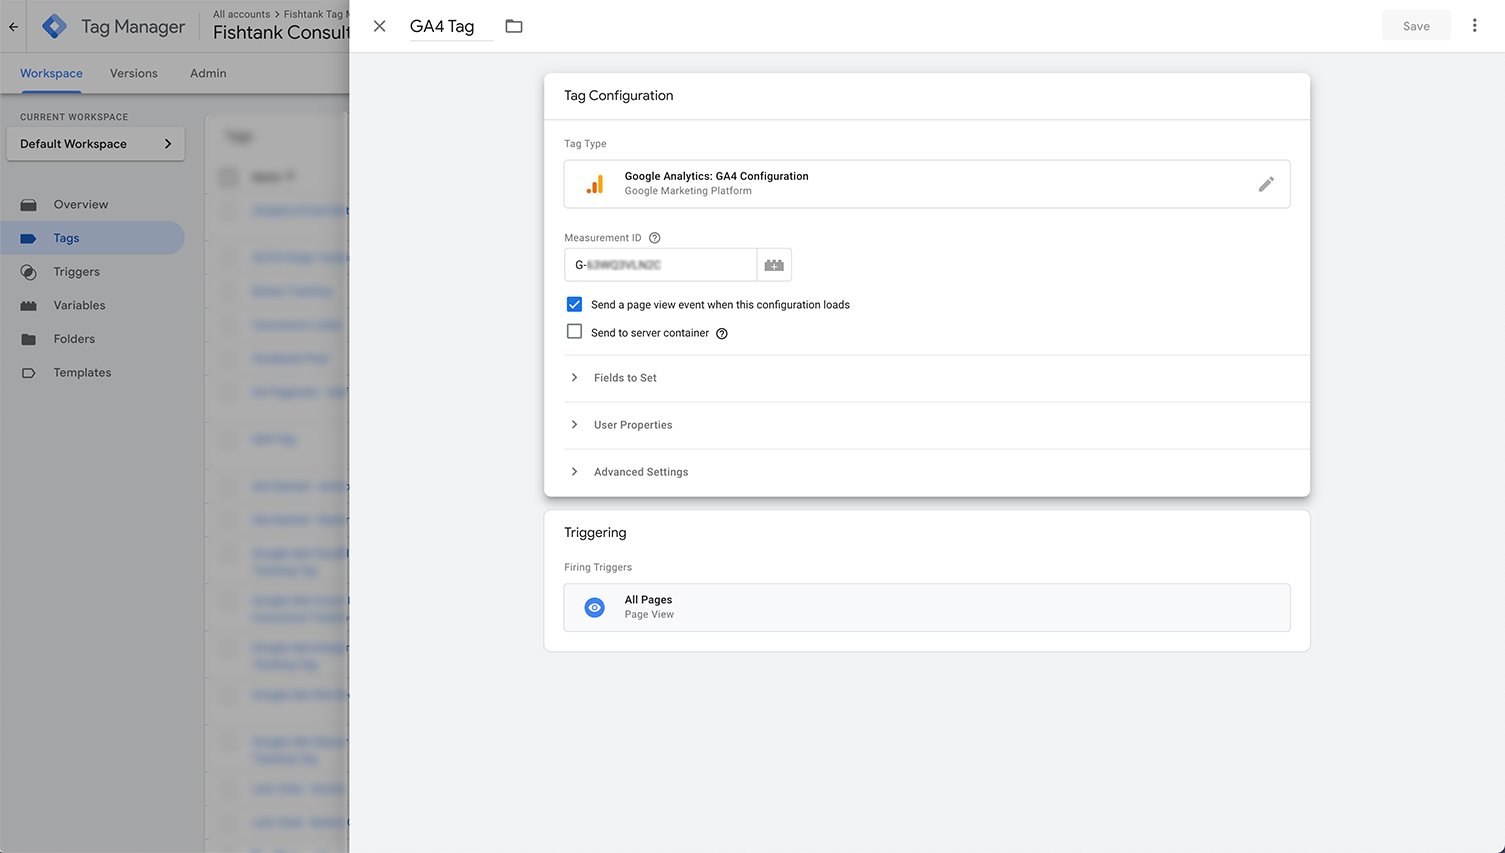 Configuring the GA4 Tag in Google Tag Manager